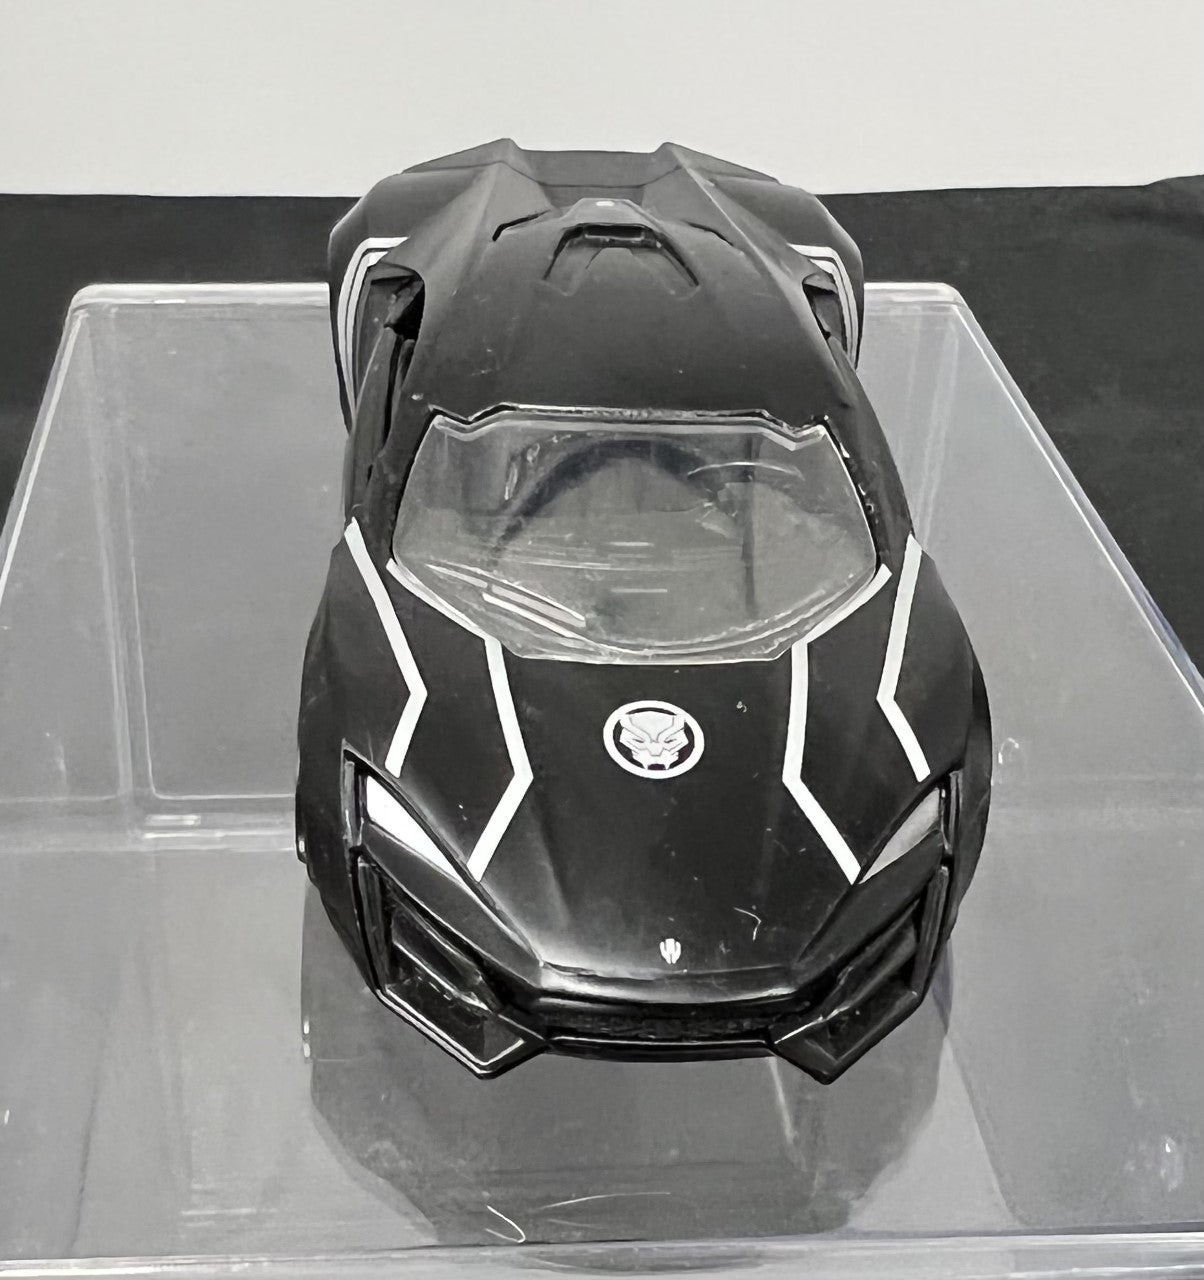 Collectible - Marvel Avengers Black Panther & Lykan Hypersport